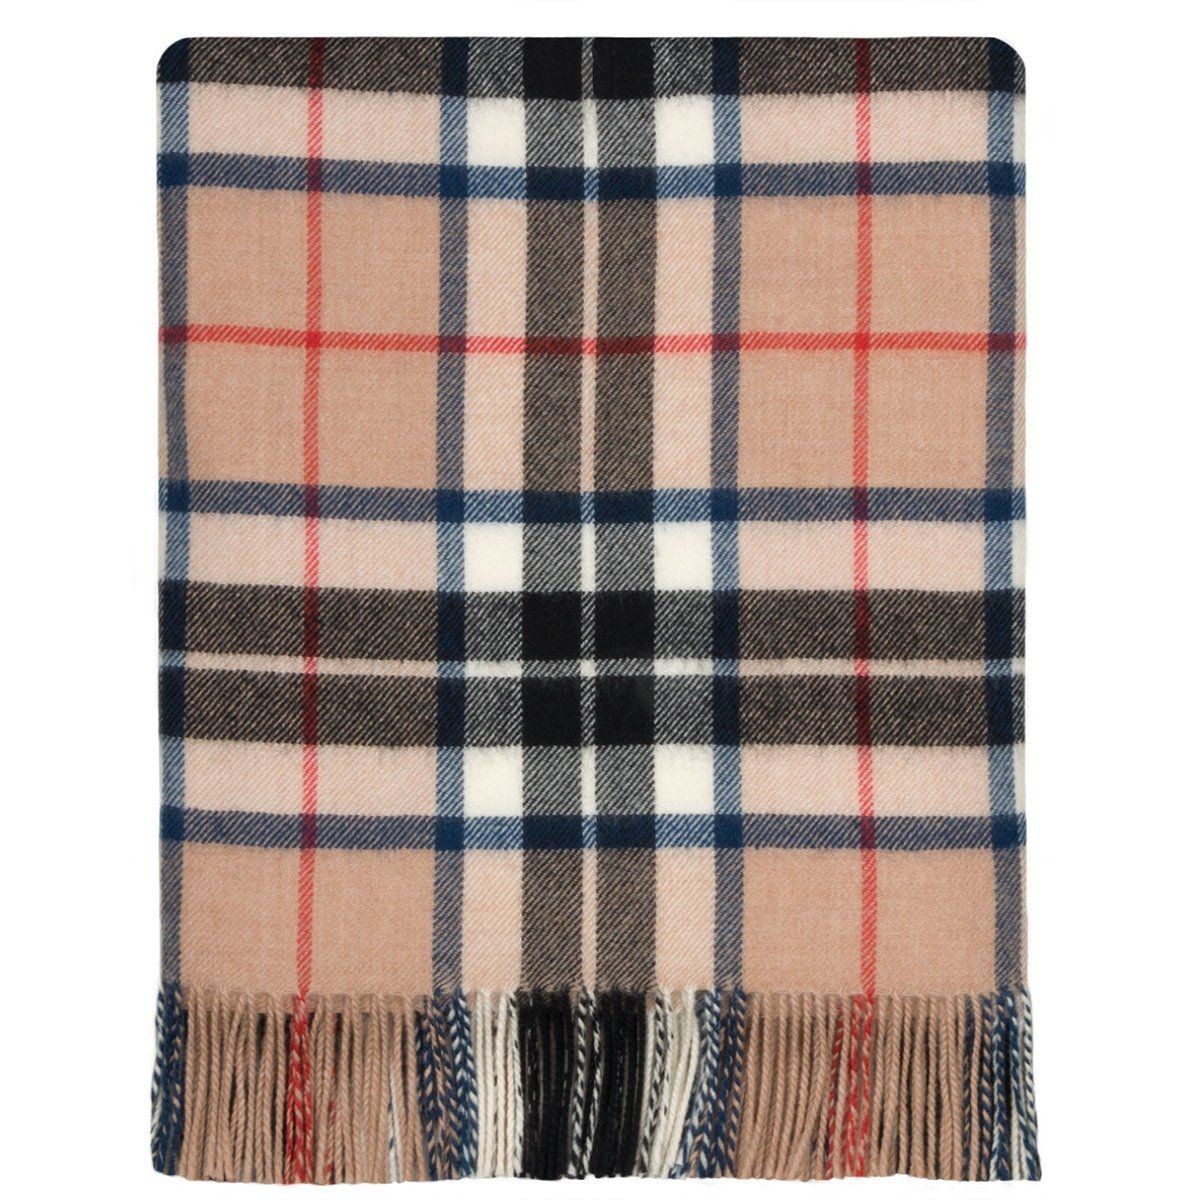 100% Lambswool Blanket in Camel Thomson by Lochcarron of Scotland